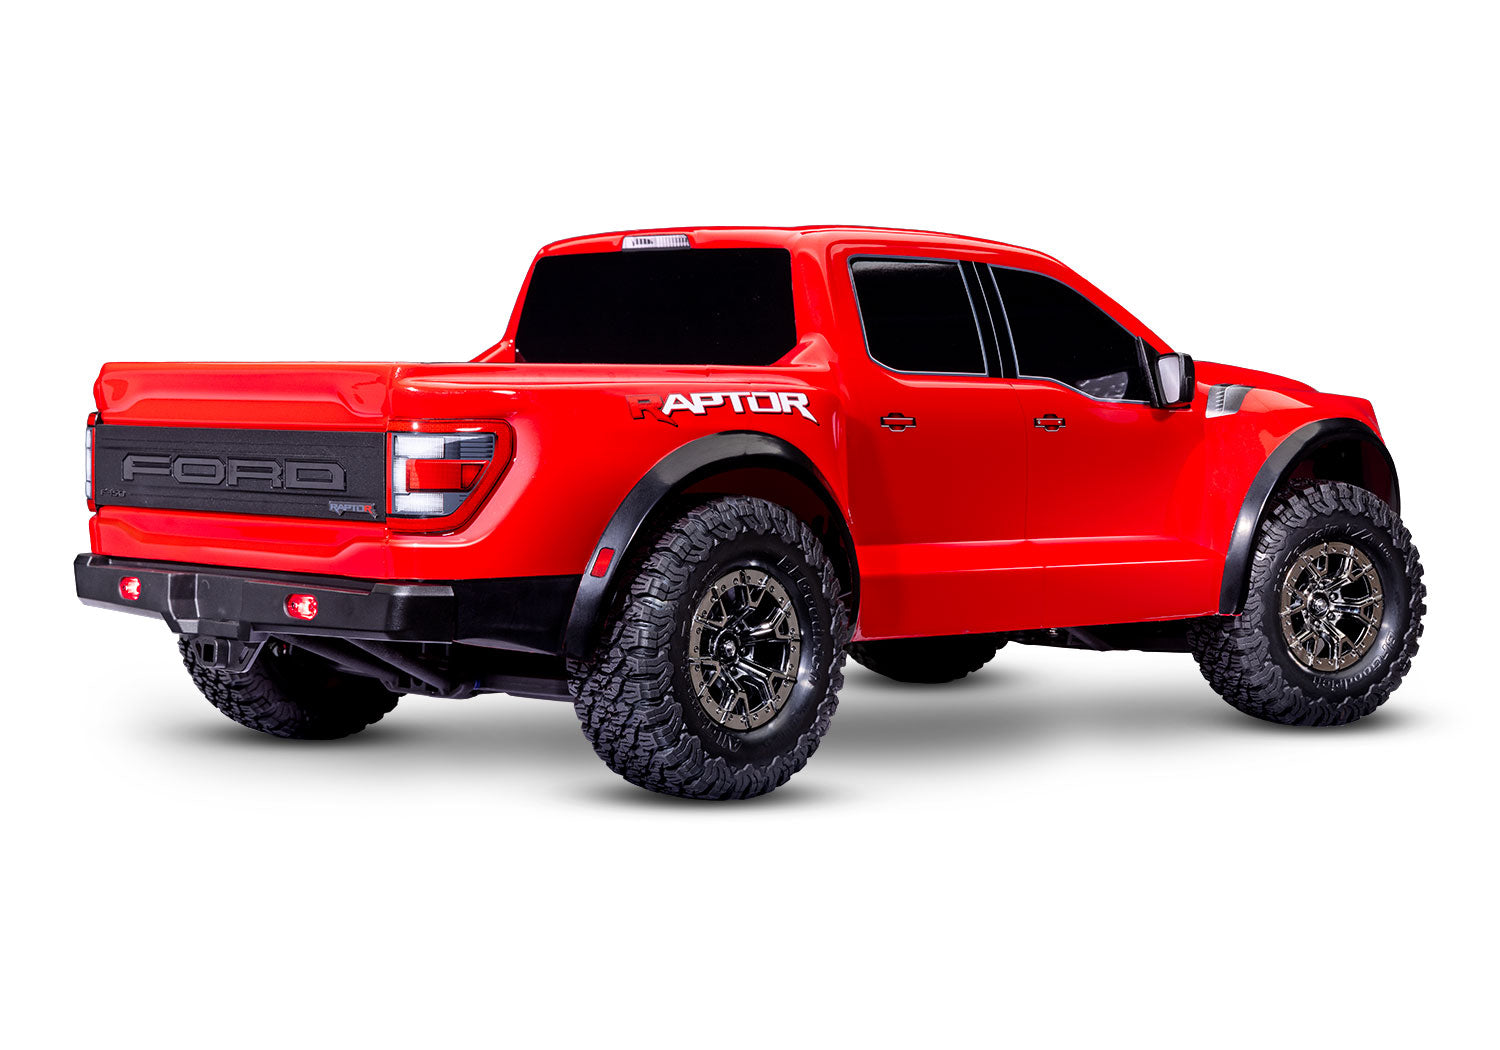 Ford Raptor R: 4X4 VXL 1/10 Scale 4X4 Brushless Replica Truck RED - Available for in-store purchase on August 4th